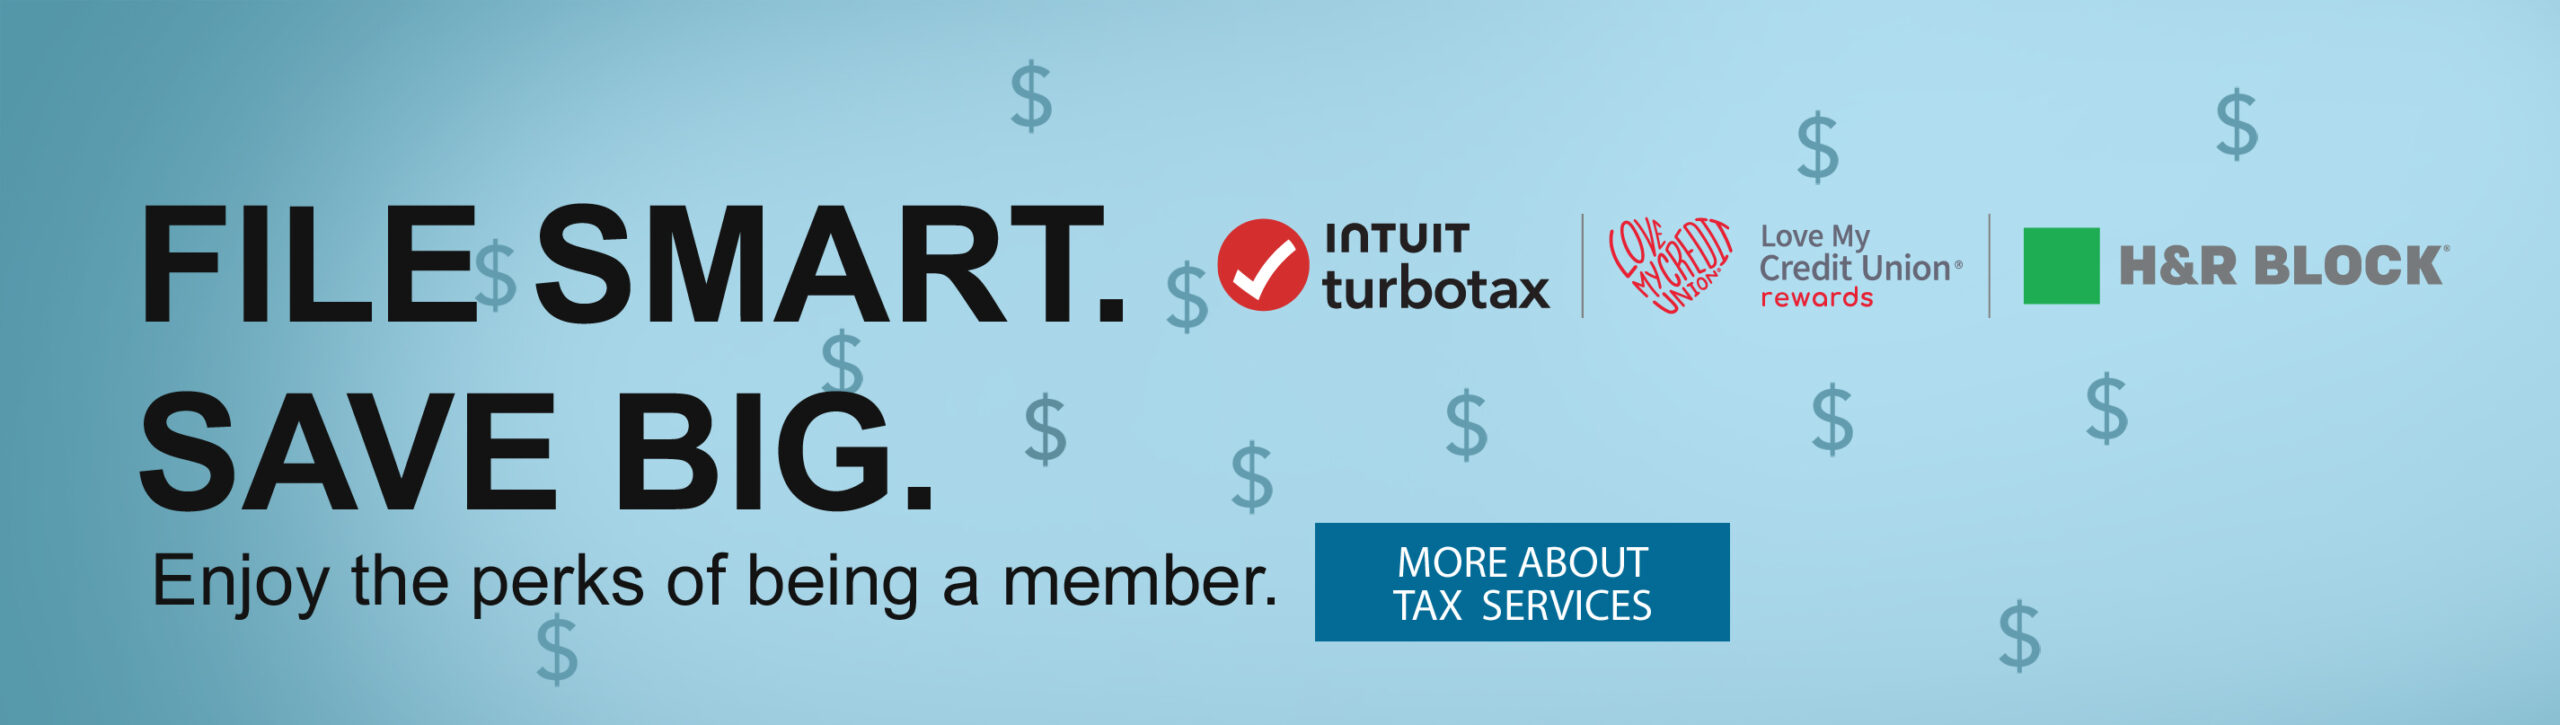 File Smart. Save Big. Enjoy the perks of being a member. Turbo Tax, H & R Block. More About Tax Services